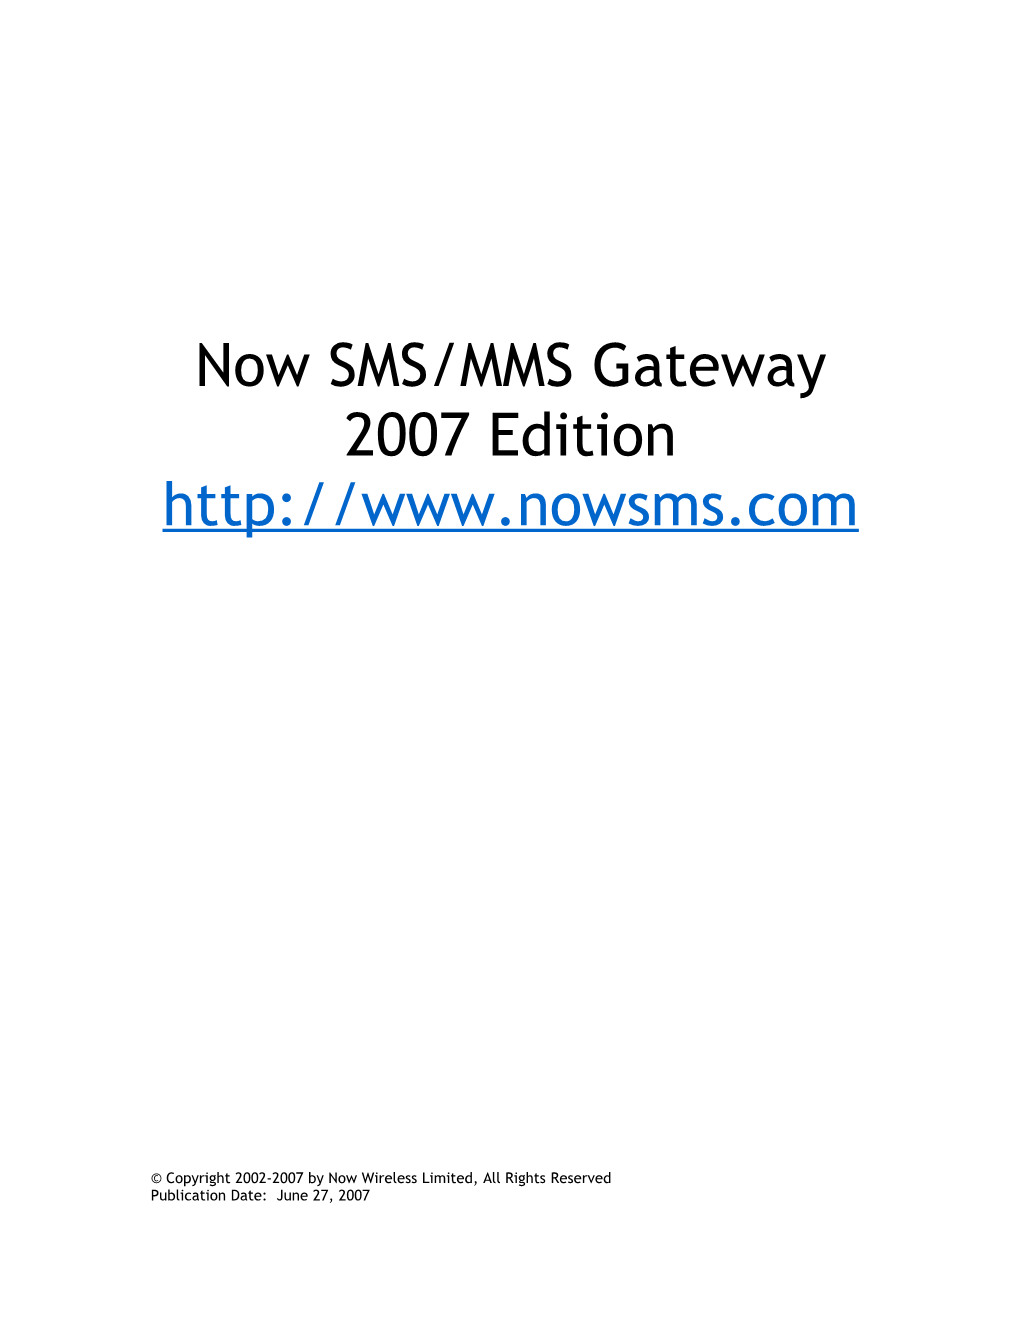 Now SMS/MMS Developer Toolkit